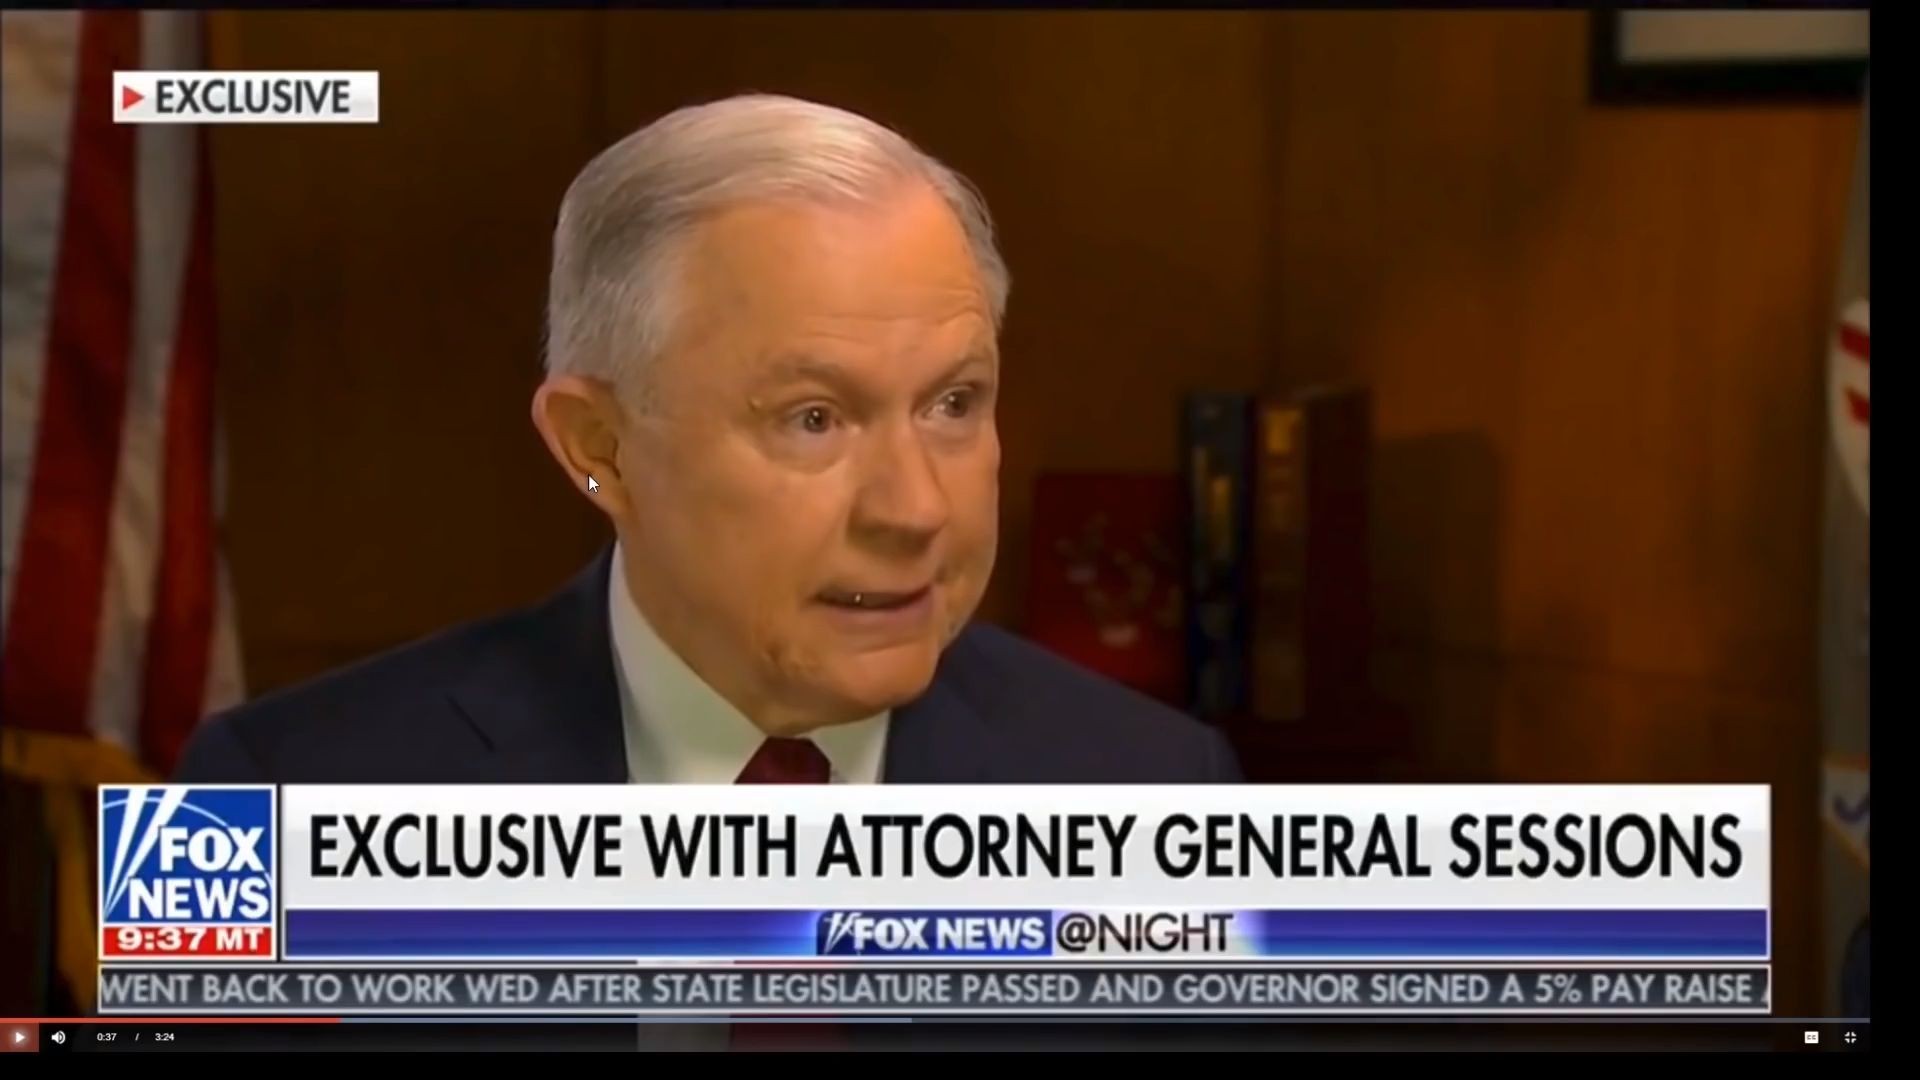 Jeff Sessions on Special Counsel